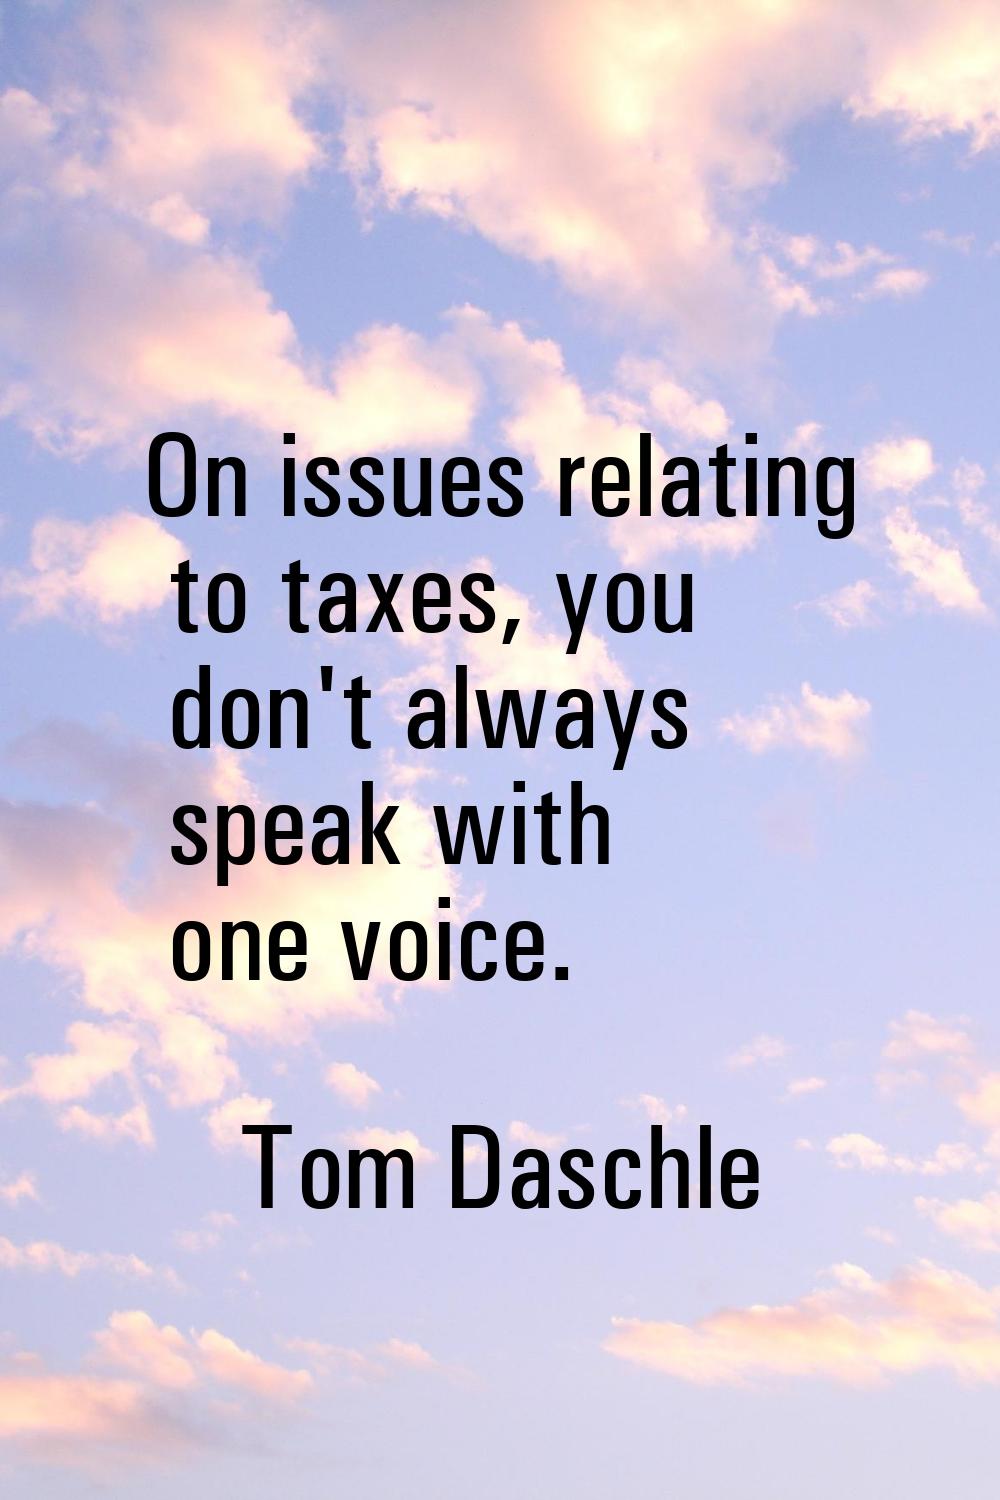 On issues relating to taxes, you don't always speak with one voice.